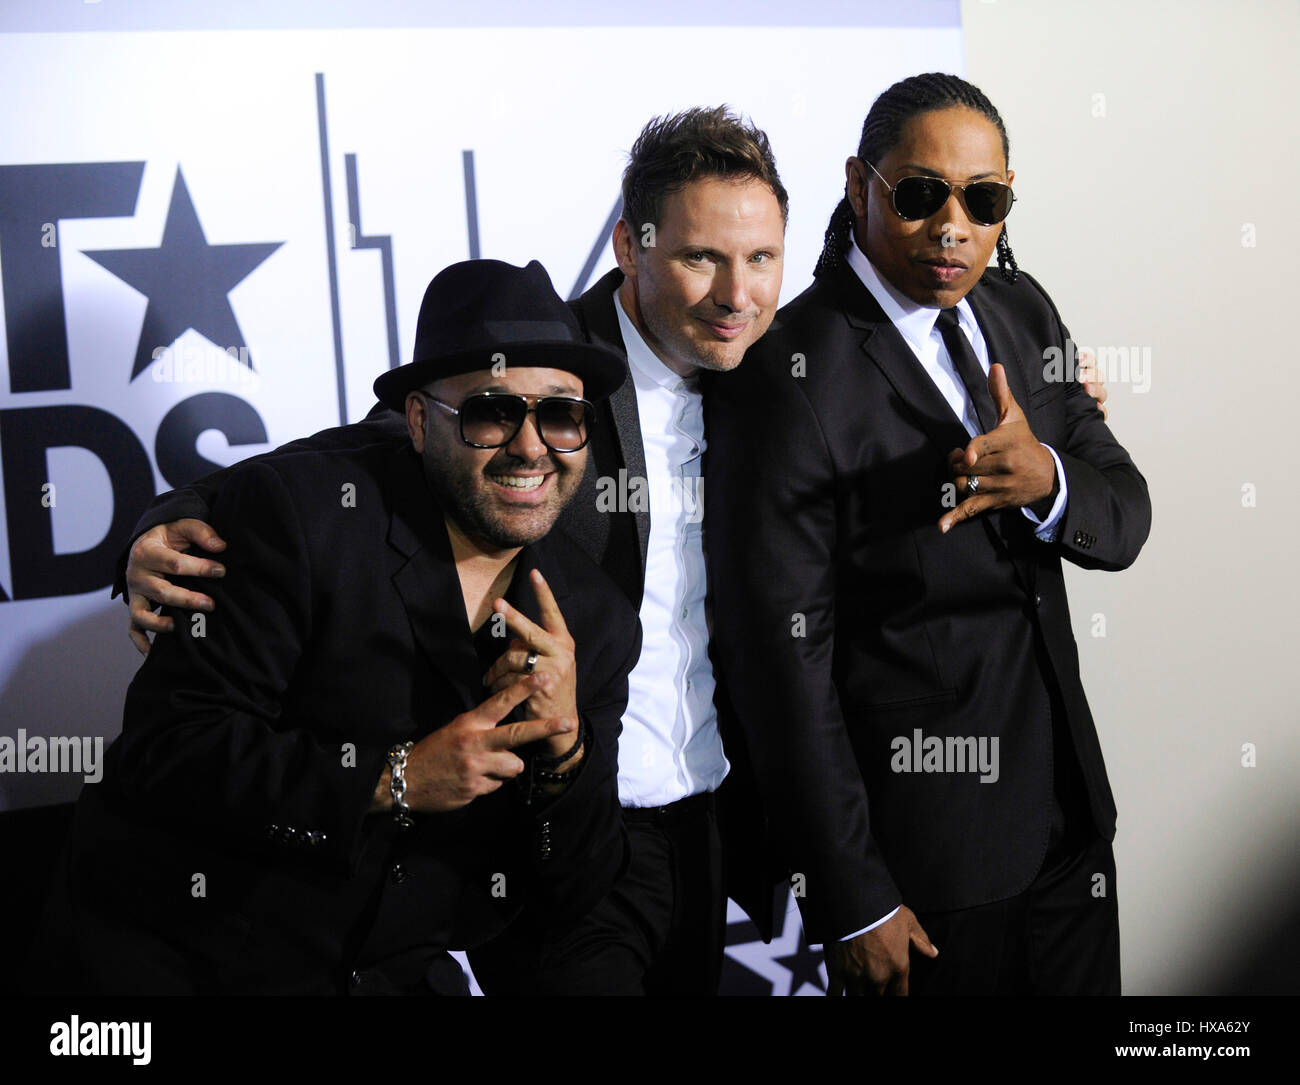 (L-R) Mark Calderon, Martin Kember and Kevin 'K.T.' Thornton of Color Me Badd pose in the press room at the 2014 BET Awards at Nokia Plaza L.A. LIVE on June 29, 2014 in Los Angeles, California. Stock Photo